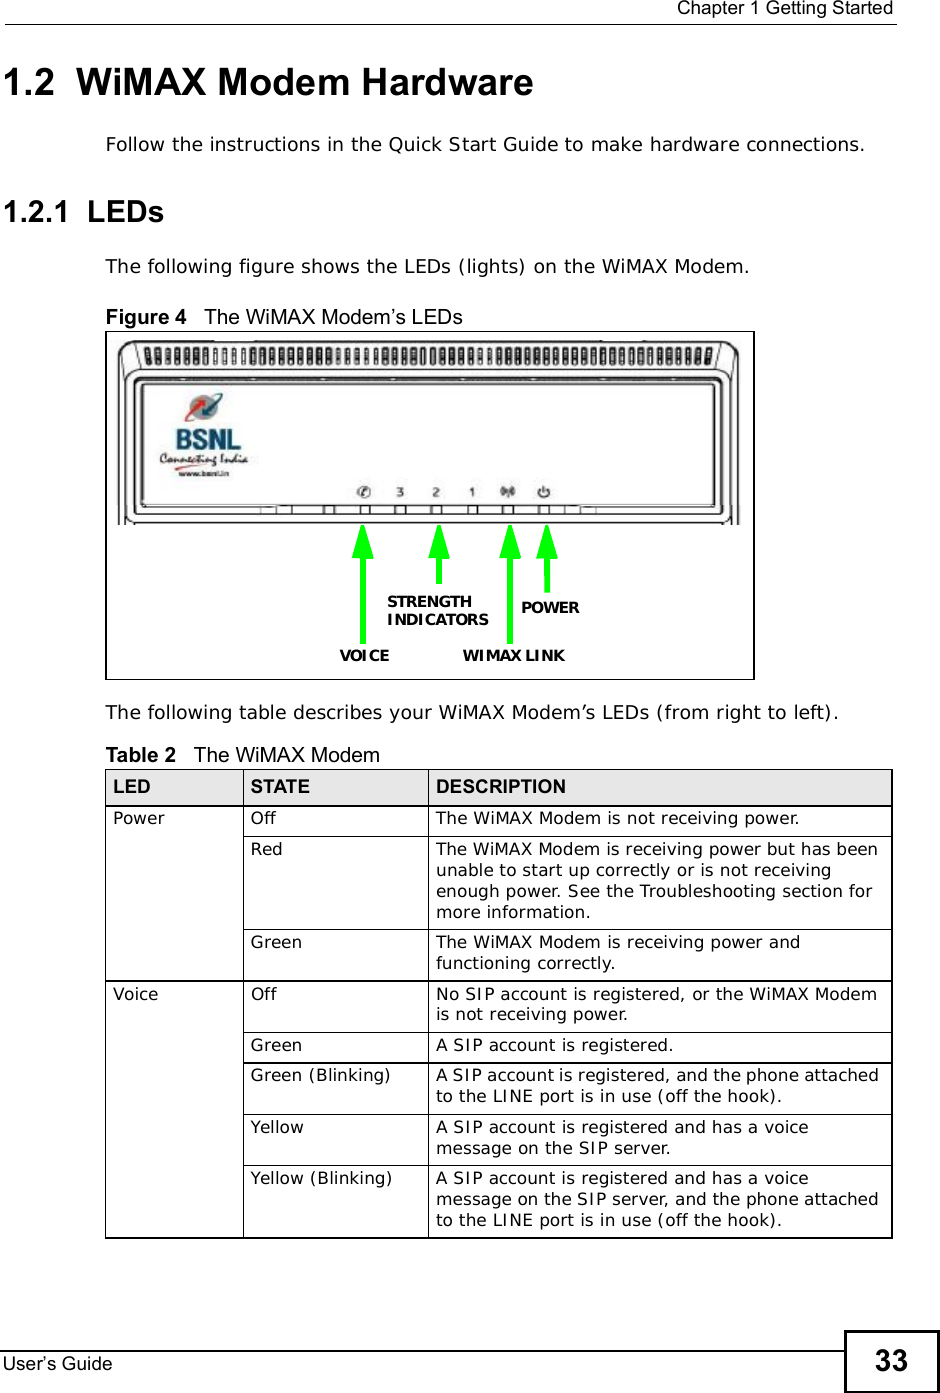  Chapter 1Getting StartedUser s Guide 331.2  WiMAX Modem HardwareFollow the instructions in the Quick Start Guideto make hardware connections.1.2.1  LEDsThe following figure shows the LEDs (lights) on the WiMAX Modem.Figure 4   The WiMAX Modem s LEDsThe following table describes your WiMAX Modem’s LEDs (from right to left).       Table 2   The WiMAX ModemLED STATE DESCRIPTIONPowerOffThe WiMAX Modem is not receiving power.RedThe WiMAX Modem is receiving power but has been unable to start up correctly or is not receiving enough power. See the Troubleshooting section for more information.GreenThe WiMAX Modem is receiving power and functioning correctly.VoiceOffNo SIP account is registered, or the WiMAX Modem is not receiving power.GreenA SIP account is registered.Green (Blinking)A SIP account is registered, and the phone attached to the LINE port is in use (off the hook).YellowA SIP account is registered and has a voice message on the SIP server.Yellow (Blinking)A SIP account is registered and has a voice message on the SIP server, and the phone attached to the LINE port is in use (off the hook).STRENGTH POWERWIMAX LINKVOICEINDICATORS